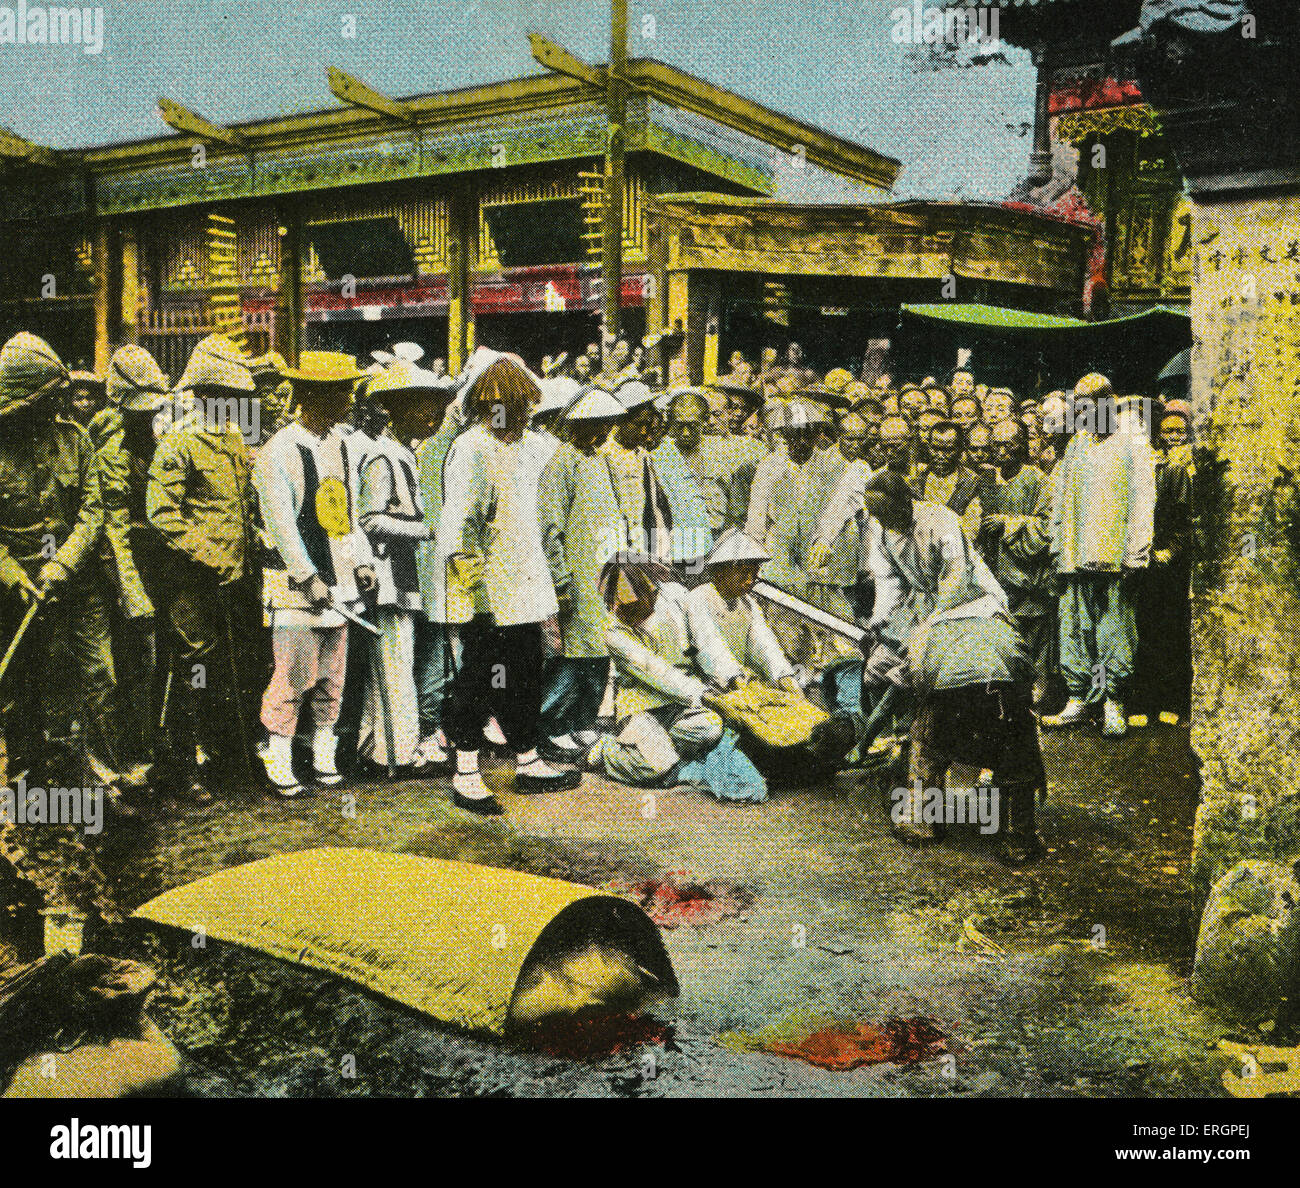 Public execution, a crowd watches a beheading by sword. China, early 20th century. Stock Photo